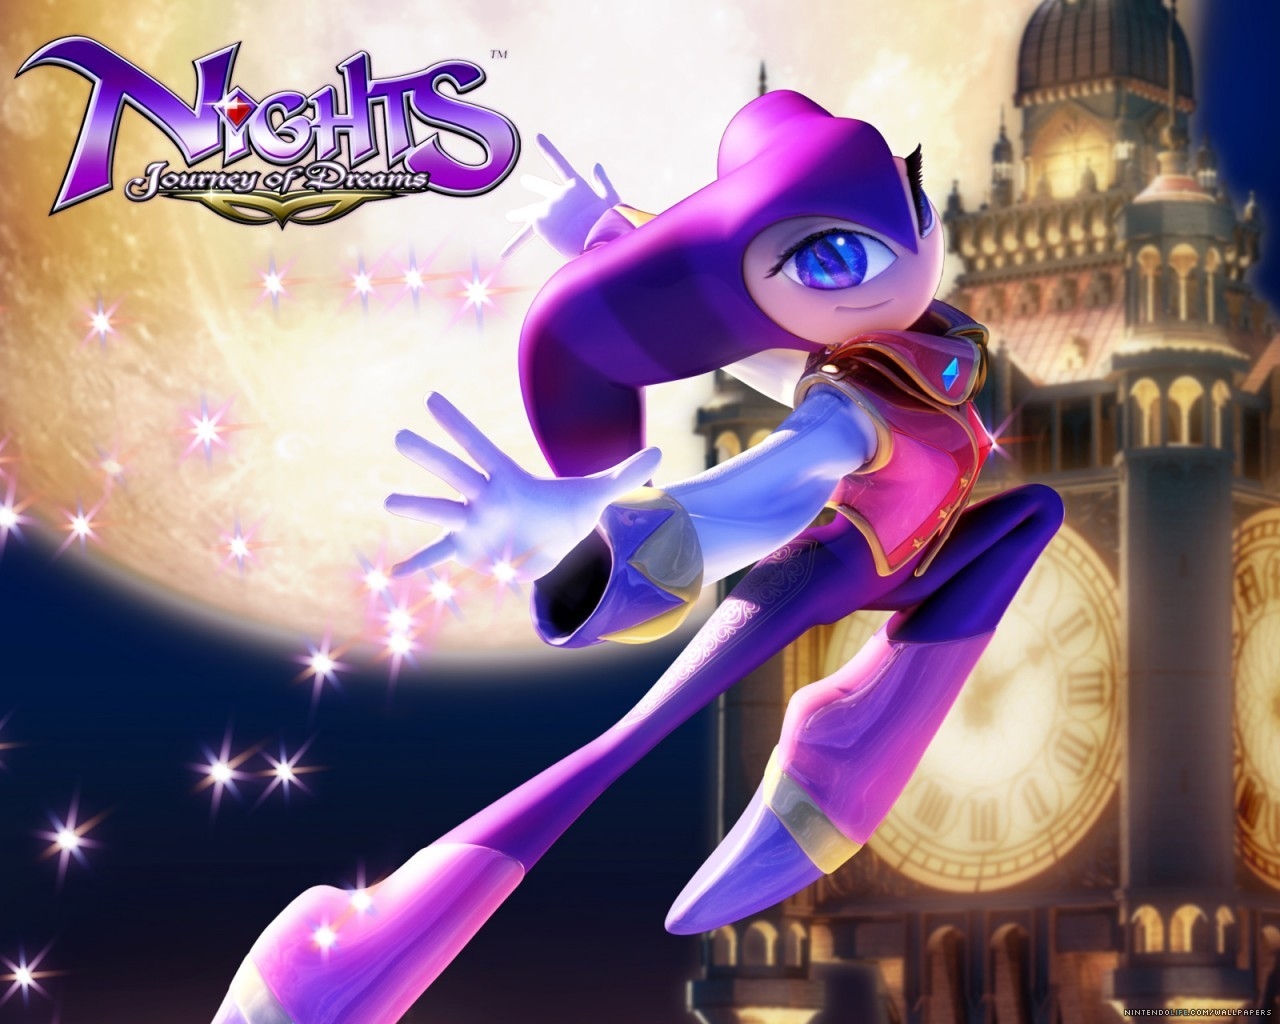 NiGHTS: Journey of Dreams for 1280 x 1024 resolution